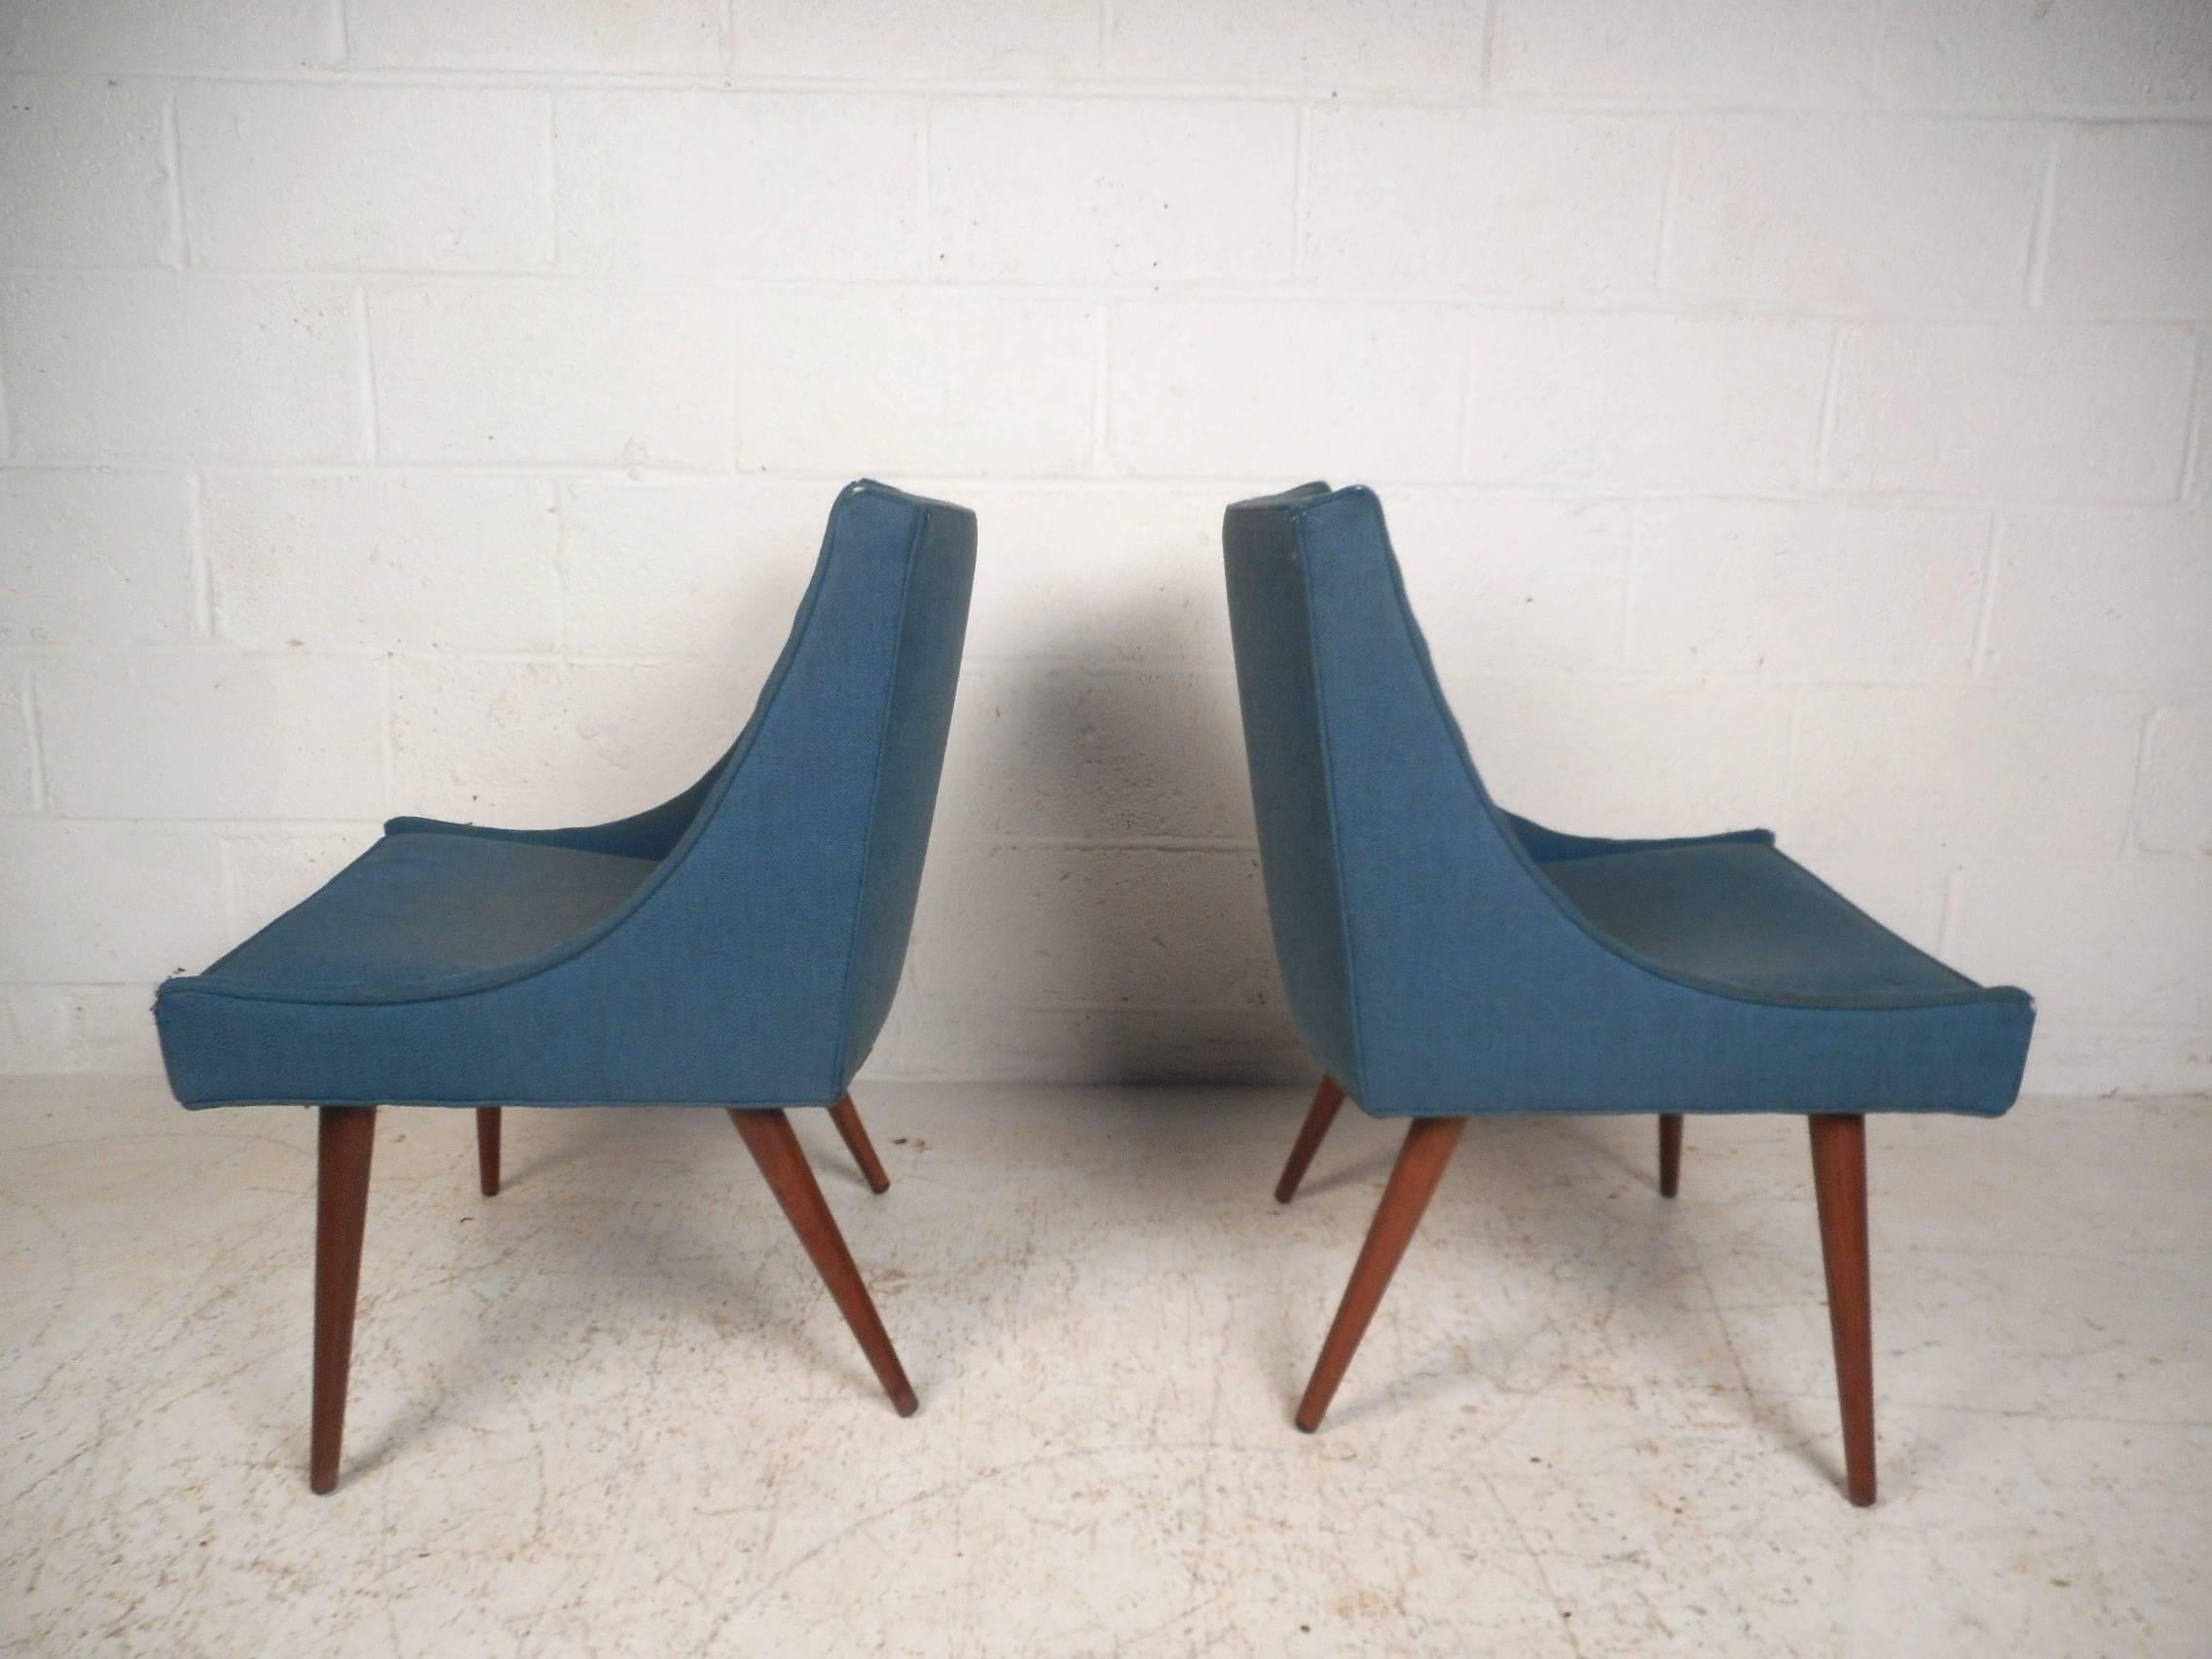 Pair of Mid-Century Modern Side Chairs by Milo Baughman for Thayer Coggin In Good Condition For Sale In Brooklyn, NY